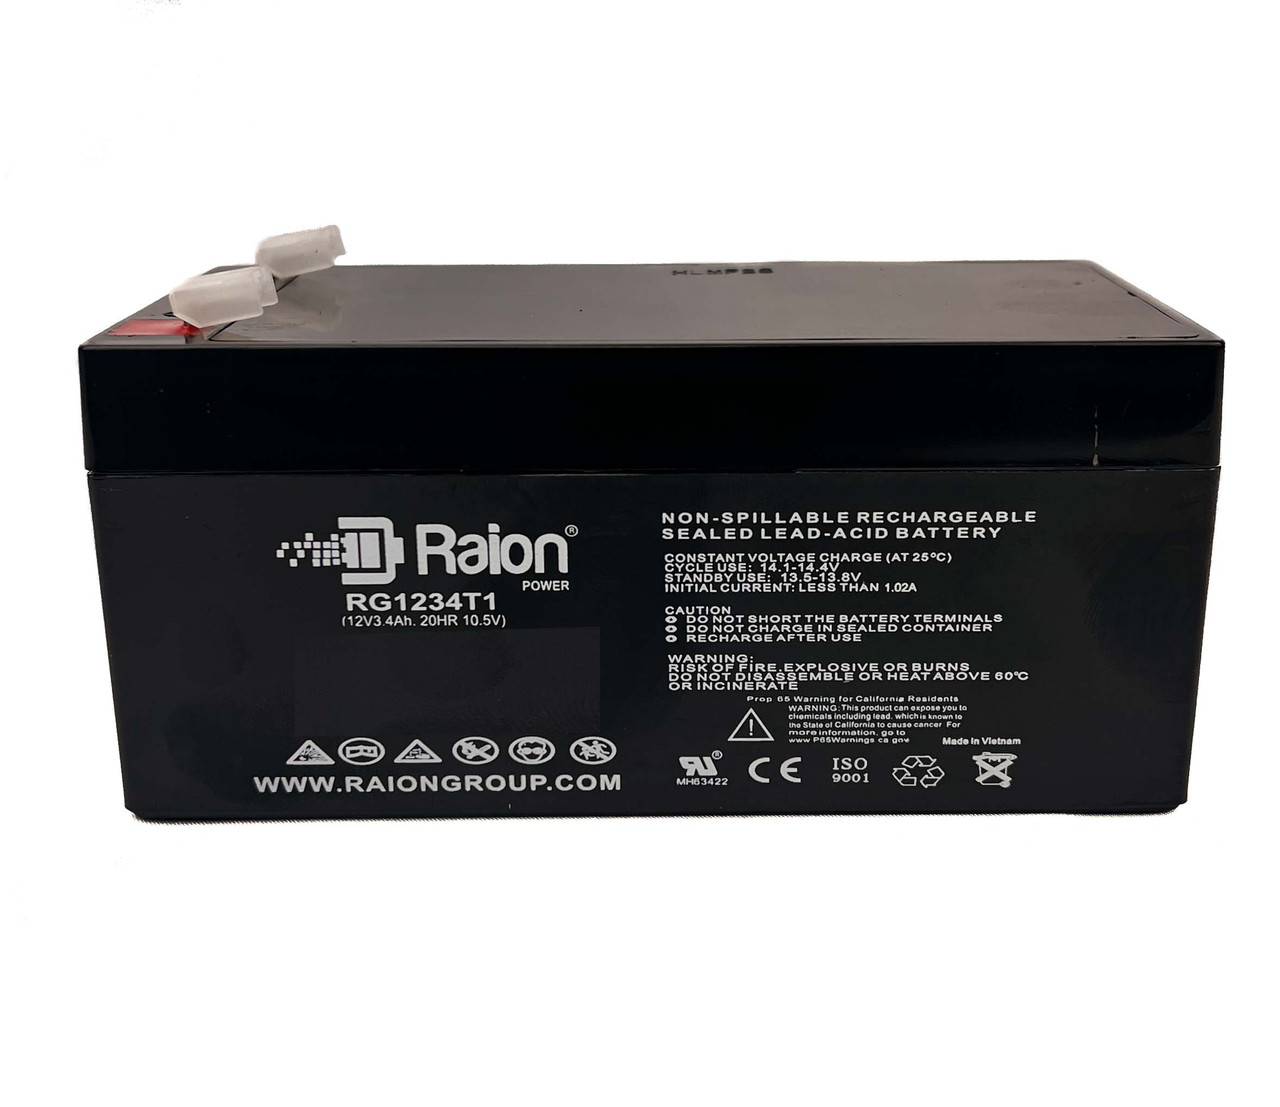 Raion Power RG1234T1 Rechargeable Compatible Replacement Battery for Criticare Systems 507, 507ER Patient Monitor